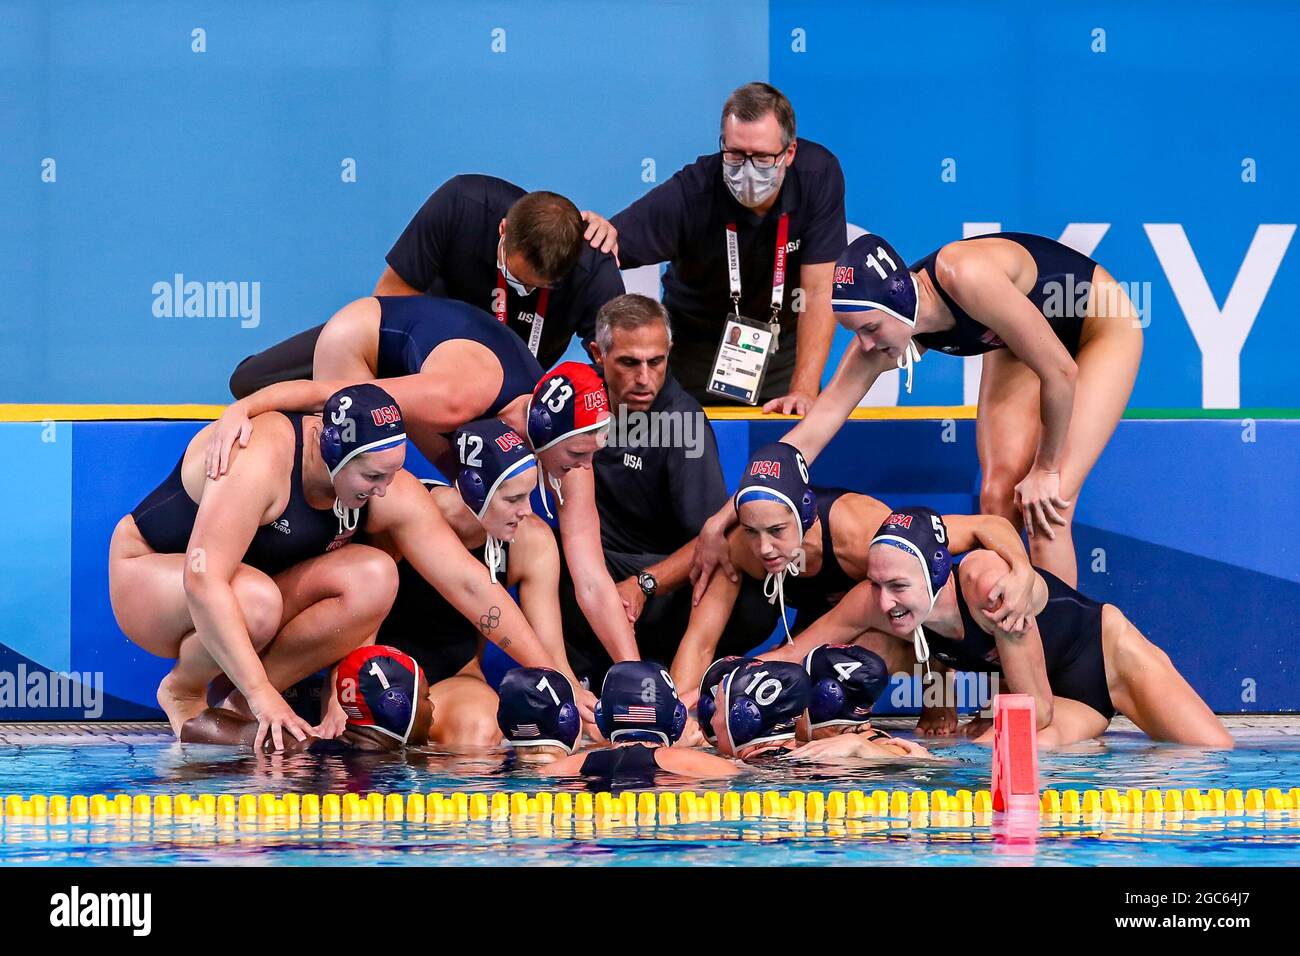 Tokyo, Japan. 07th Aug, 2021. TOKYO, JAPAN - AUGUST 7: head coach Adam Krikorian of United States, assistant coach Daniel Klatt of United States, assistant coach Christopher Oeding of United StatesMaggie Steffens of United States, Ashleigh Johnson of United States, Maddie Musselman of United States, Melissa Seidemann of United States, Rachel Fattal of United States, Paige Hauschild of United States, Stephania Haralabidis of United States, Aria Fischer of United States, Kaleigh Gilchrist of United States, Makenzie Fischer of United States, Alys Williams of United States, Amanda Longan of United Stock Photo